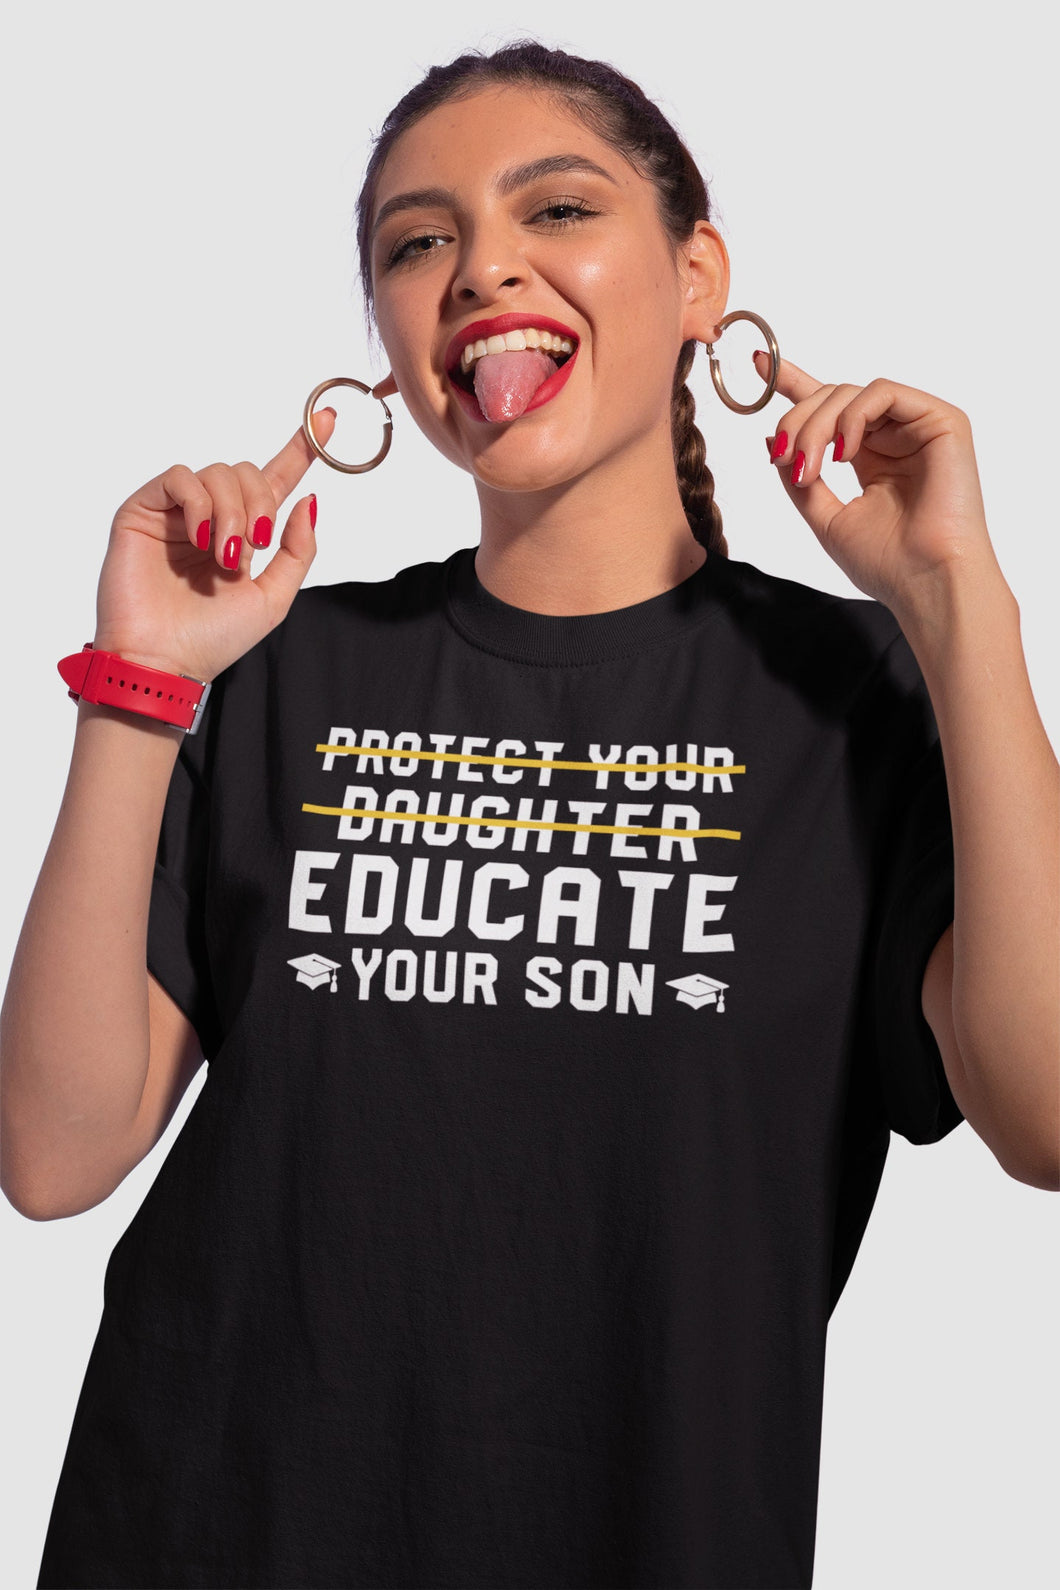 Protect Your Daughter Educate Your Son Shirt, Women Empowerment Shirt, Ruth Bader Ginsburg